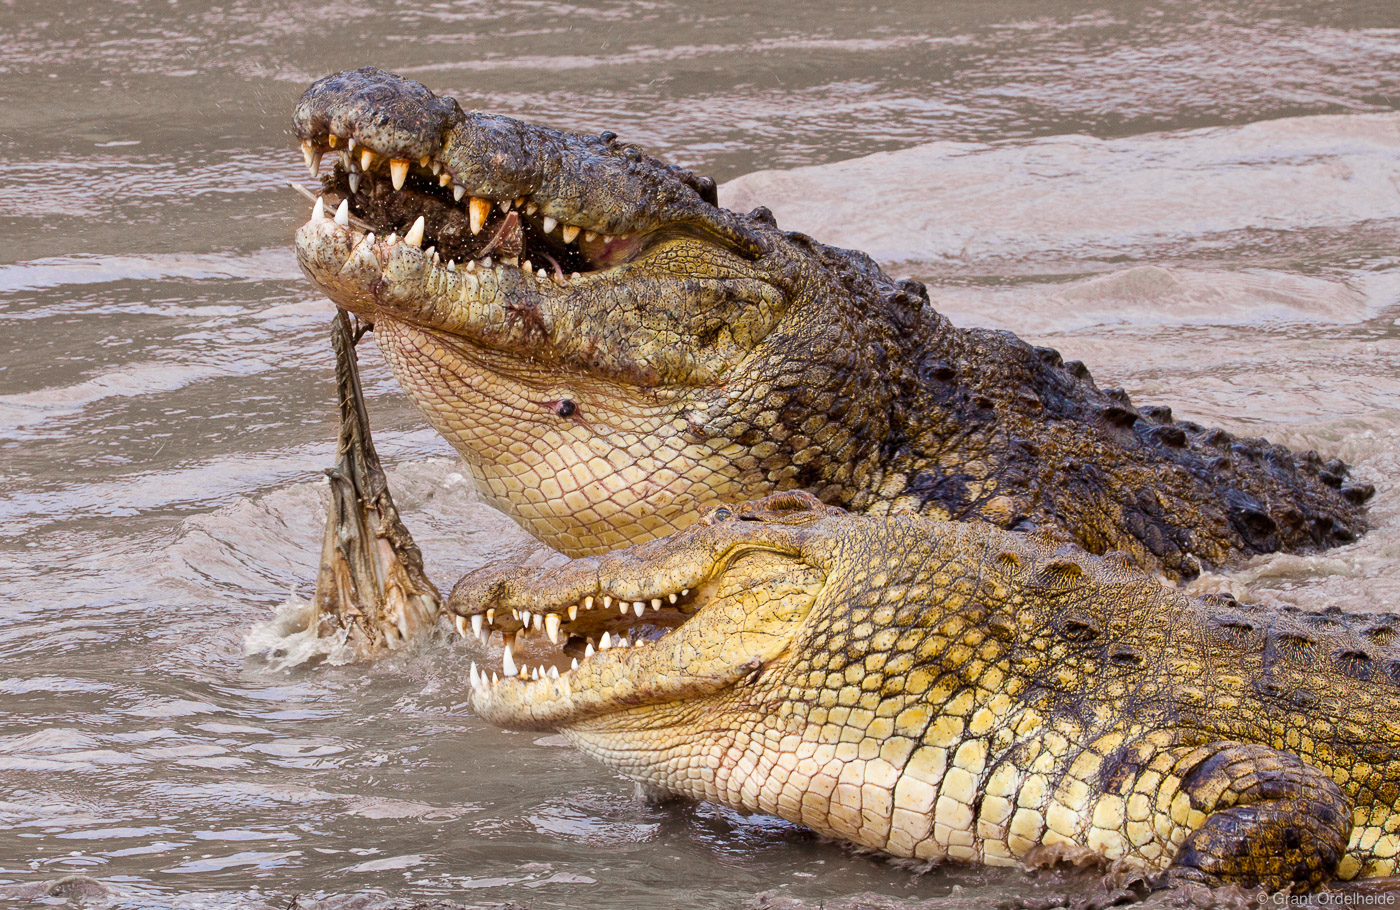 Two massive crocodiles fight over the carcass of a dead wildebeest.